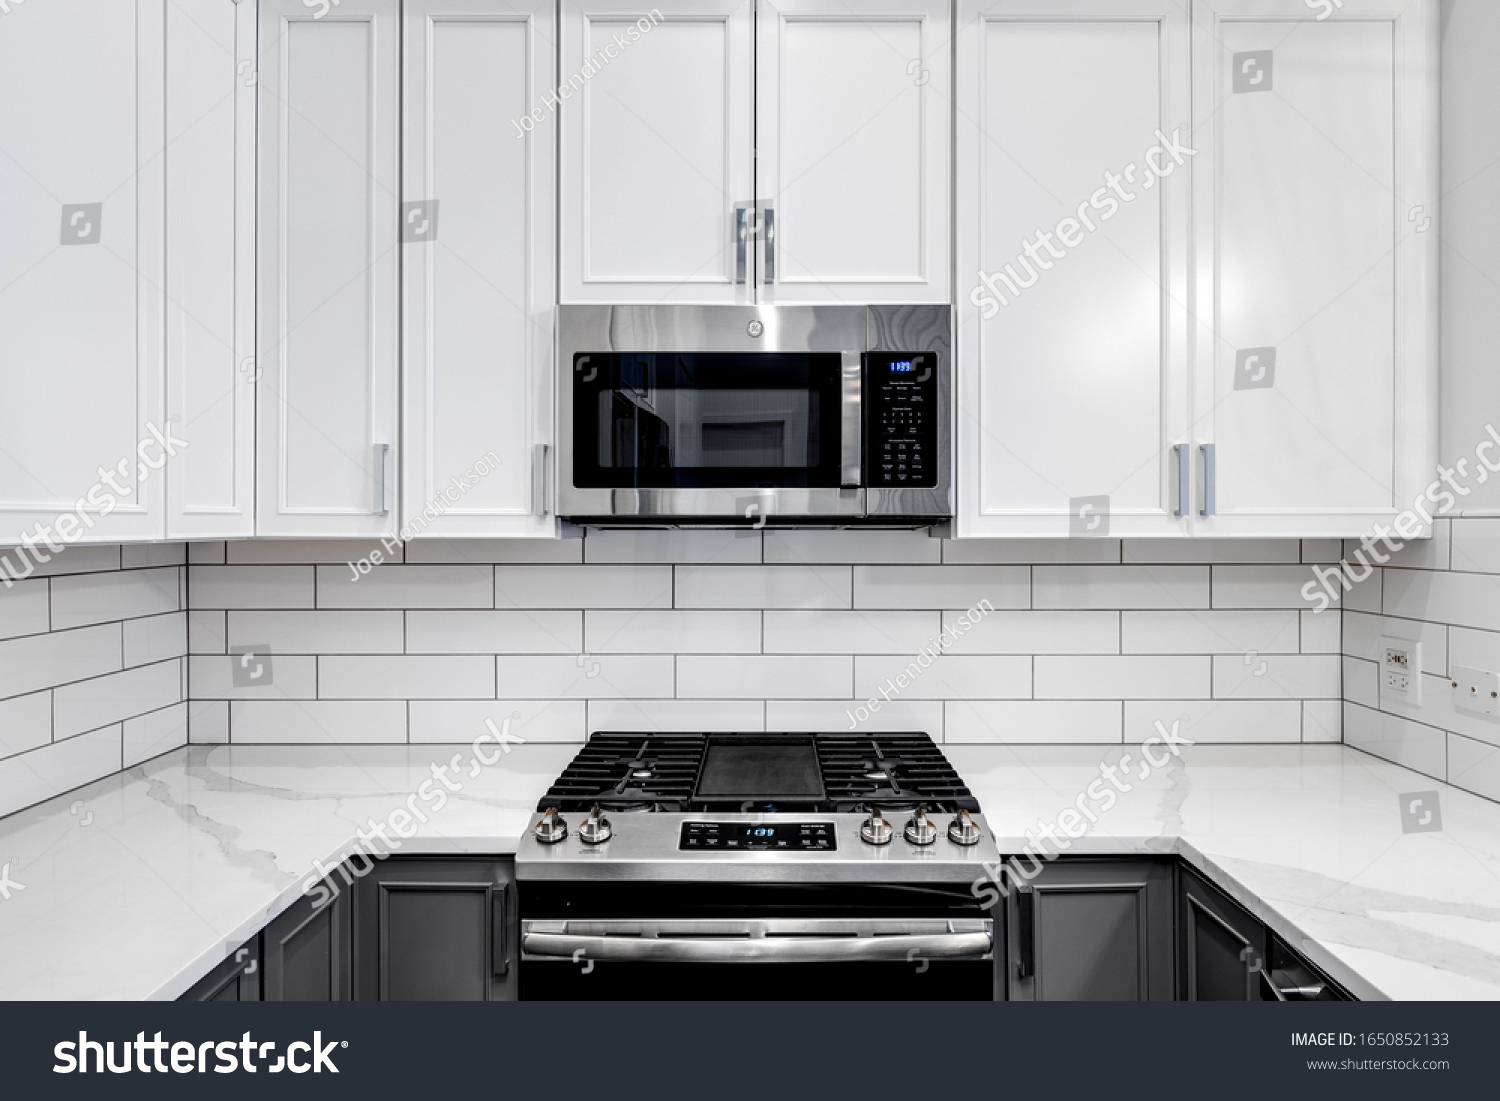 17 Microwave oven ge microwave Images, Stock Photos & Vectors ...